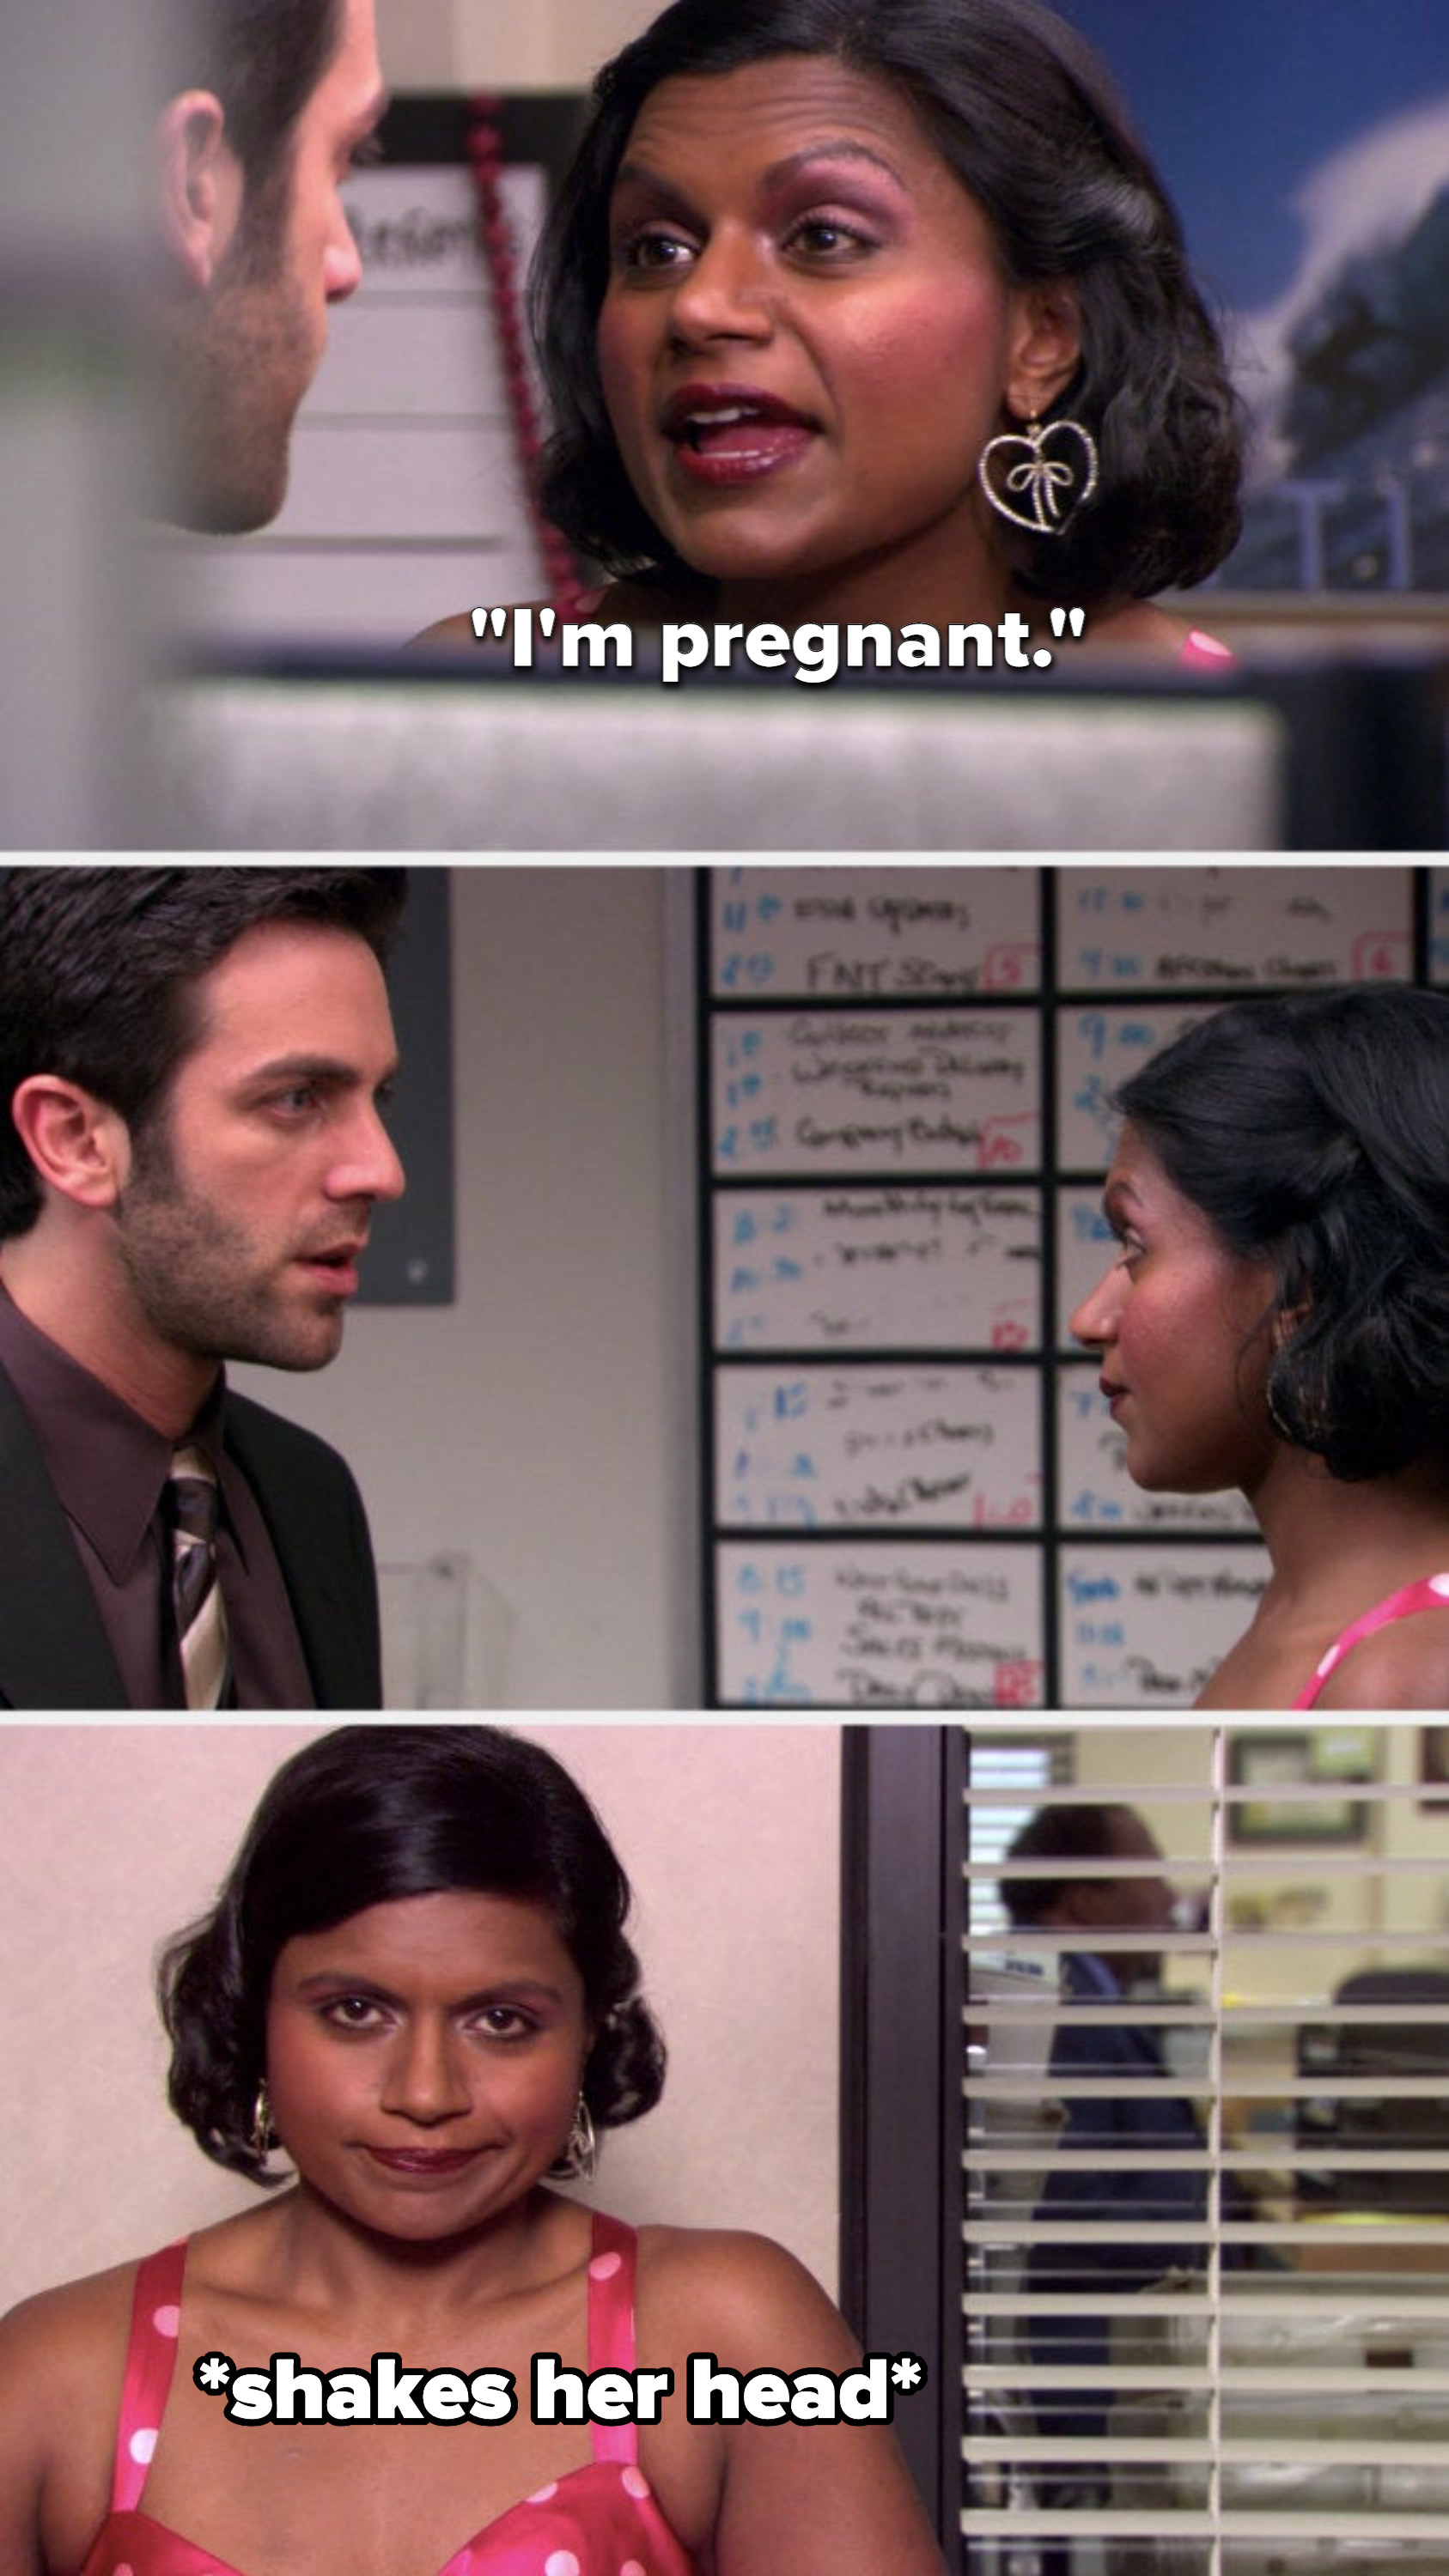 On The Office, Kelly tells Ryan she&#x27;s pregnant, then she shakes her head no in a talking head, meaning she isn&#x27;t actually pregnant